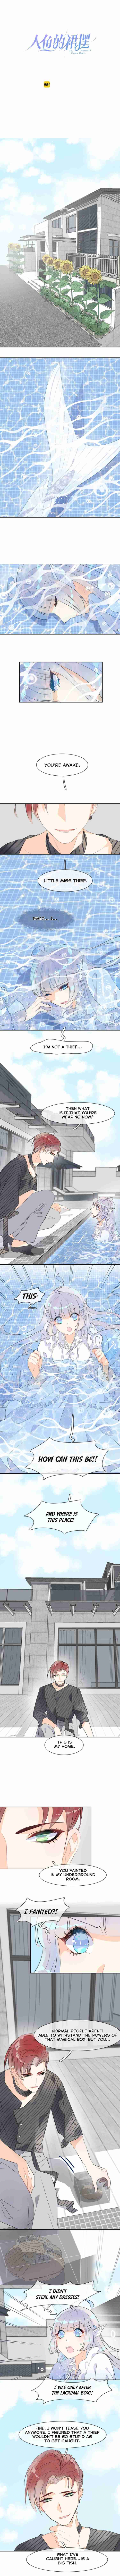 The Mermaid Wears a Dress Ch. 2 Mermaid's Counterattack